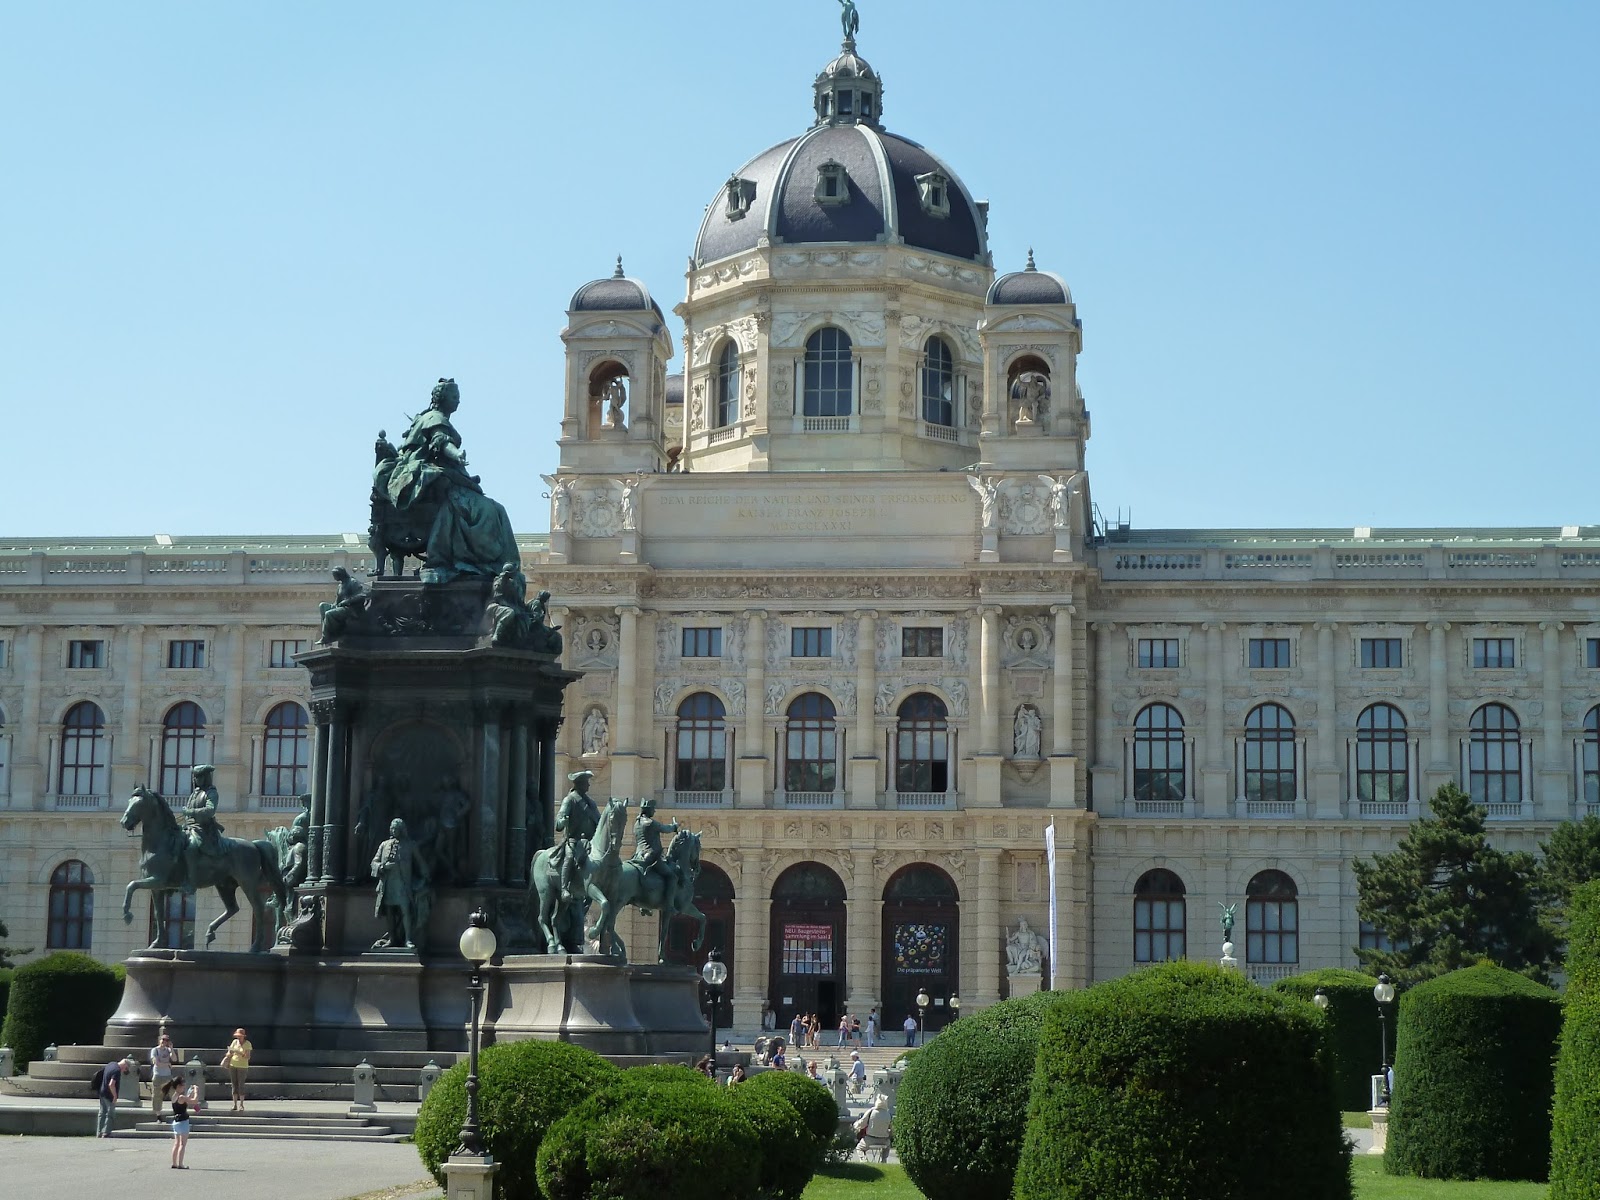 Museumsquartier & Maria Theresa's statue